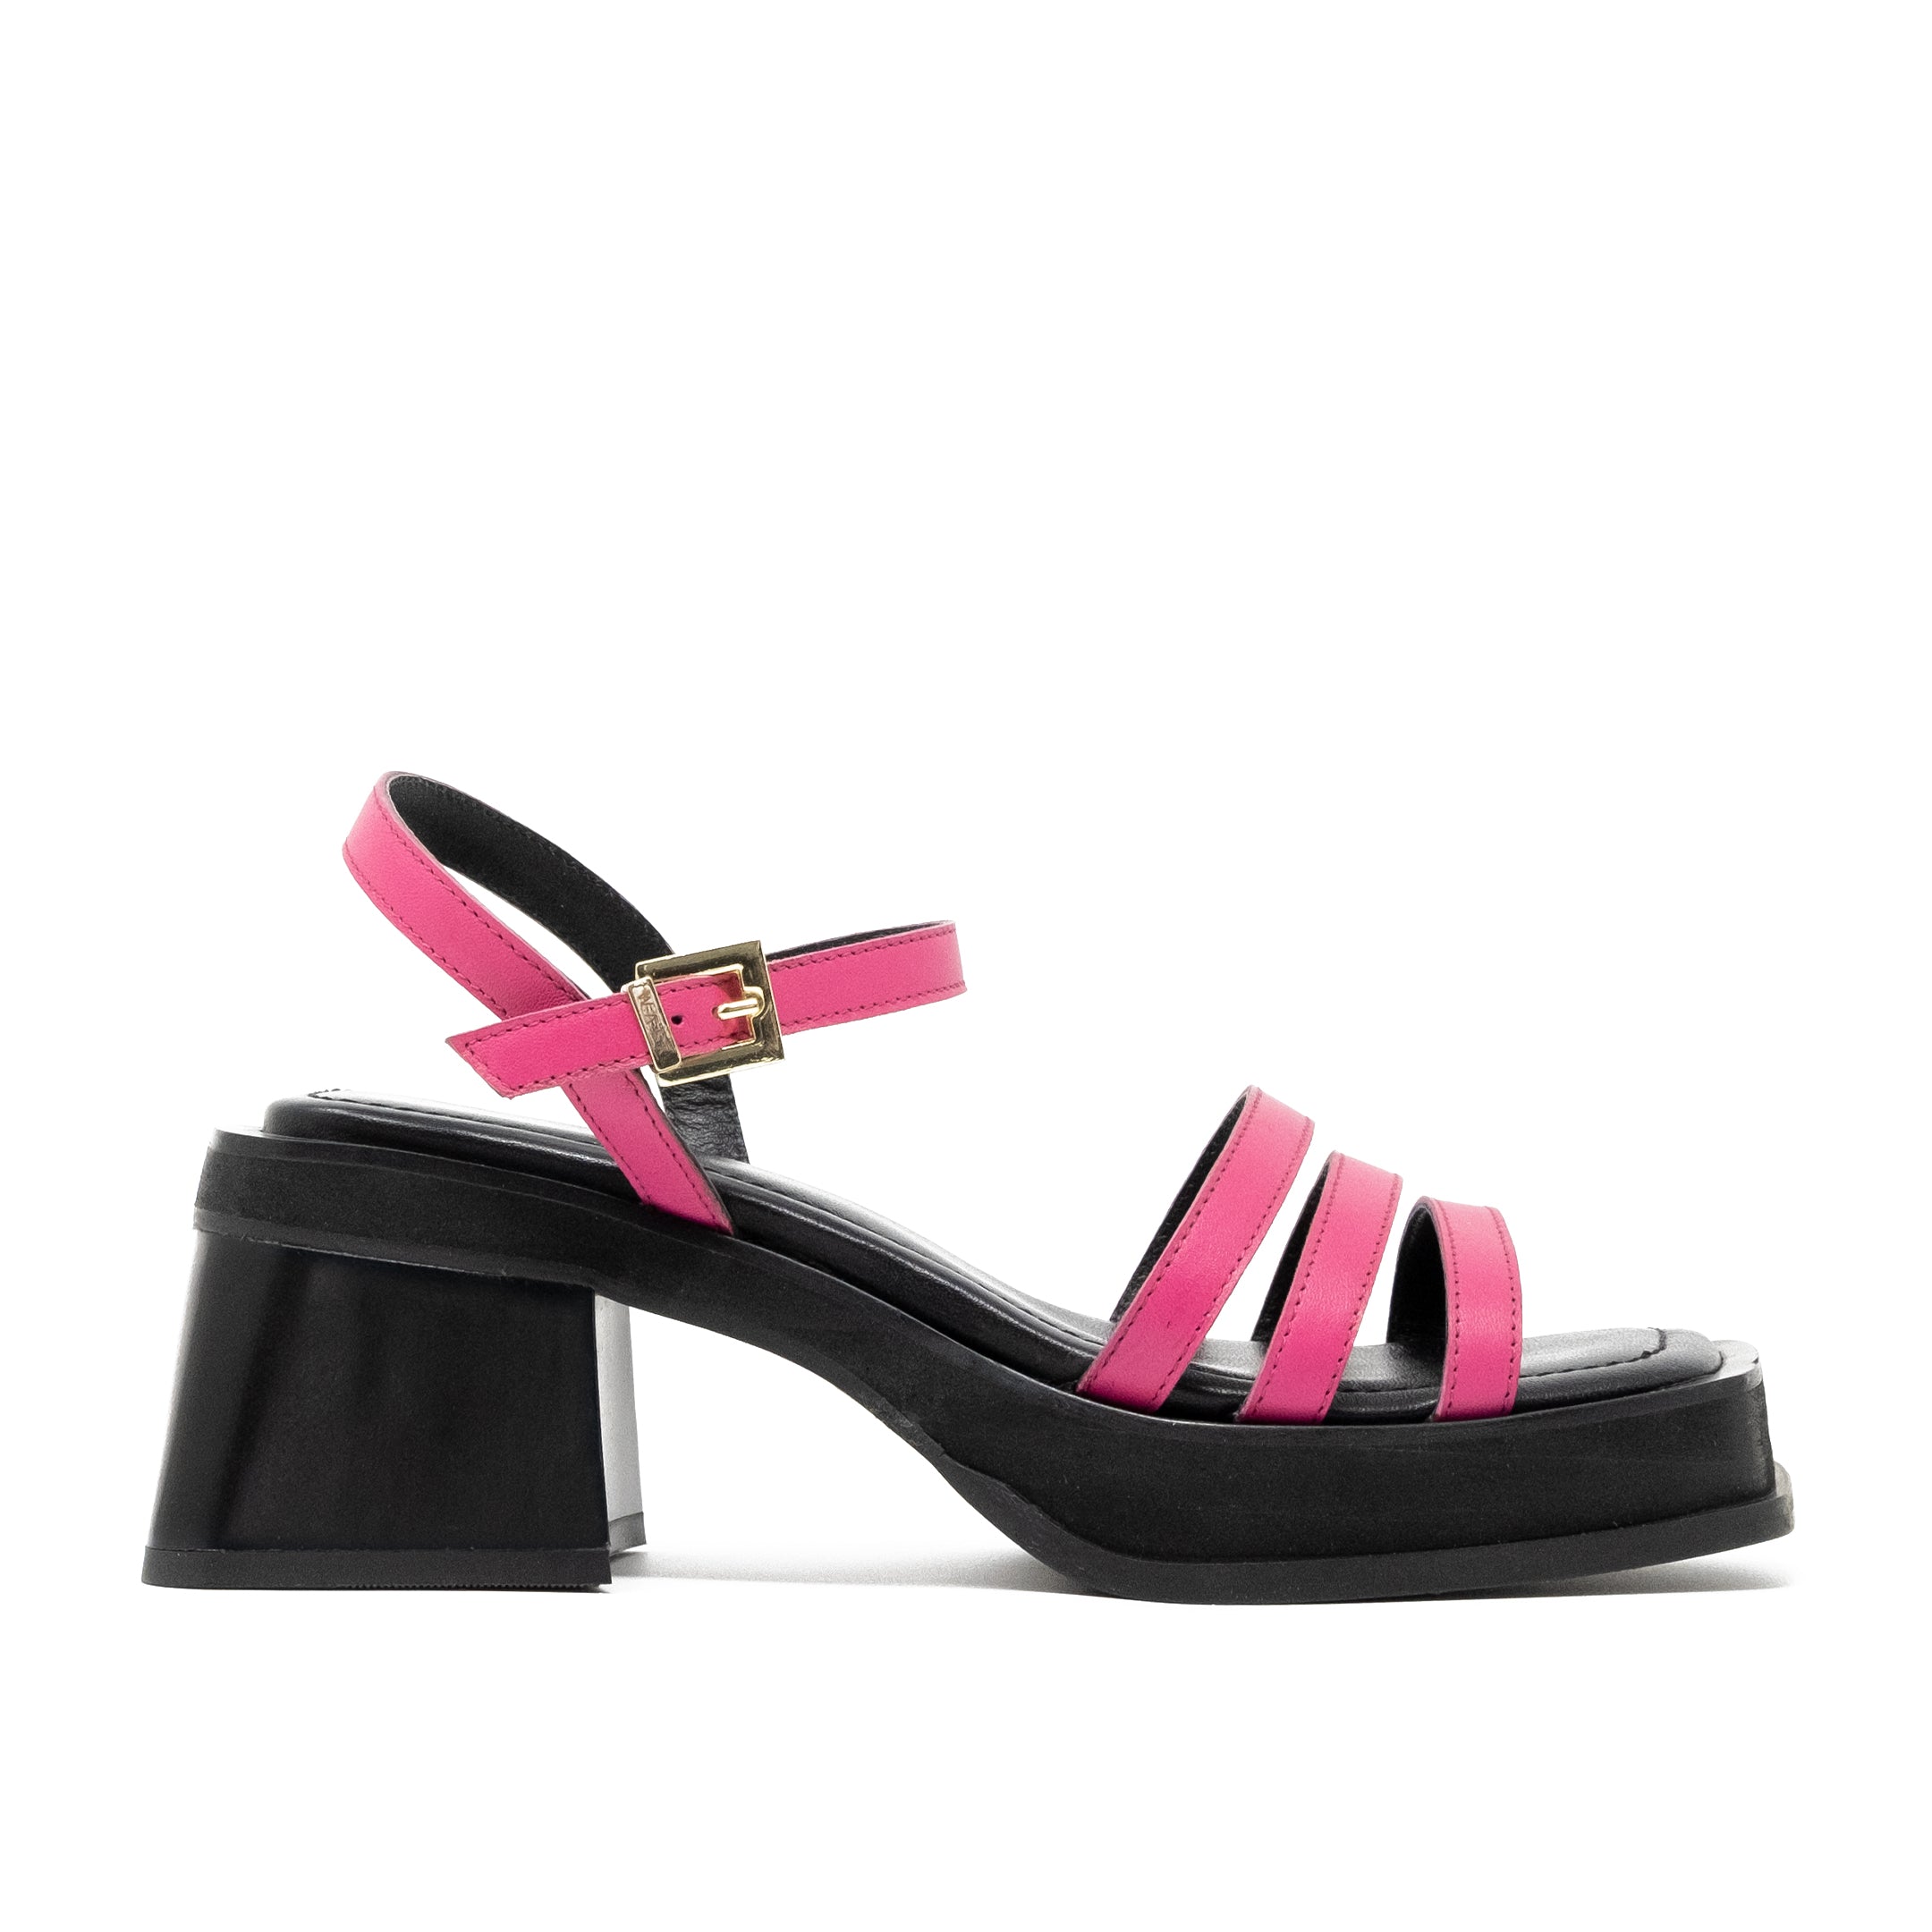 Walk London Lily Ankle Strap Sandal in Pink Leather